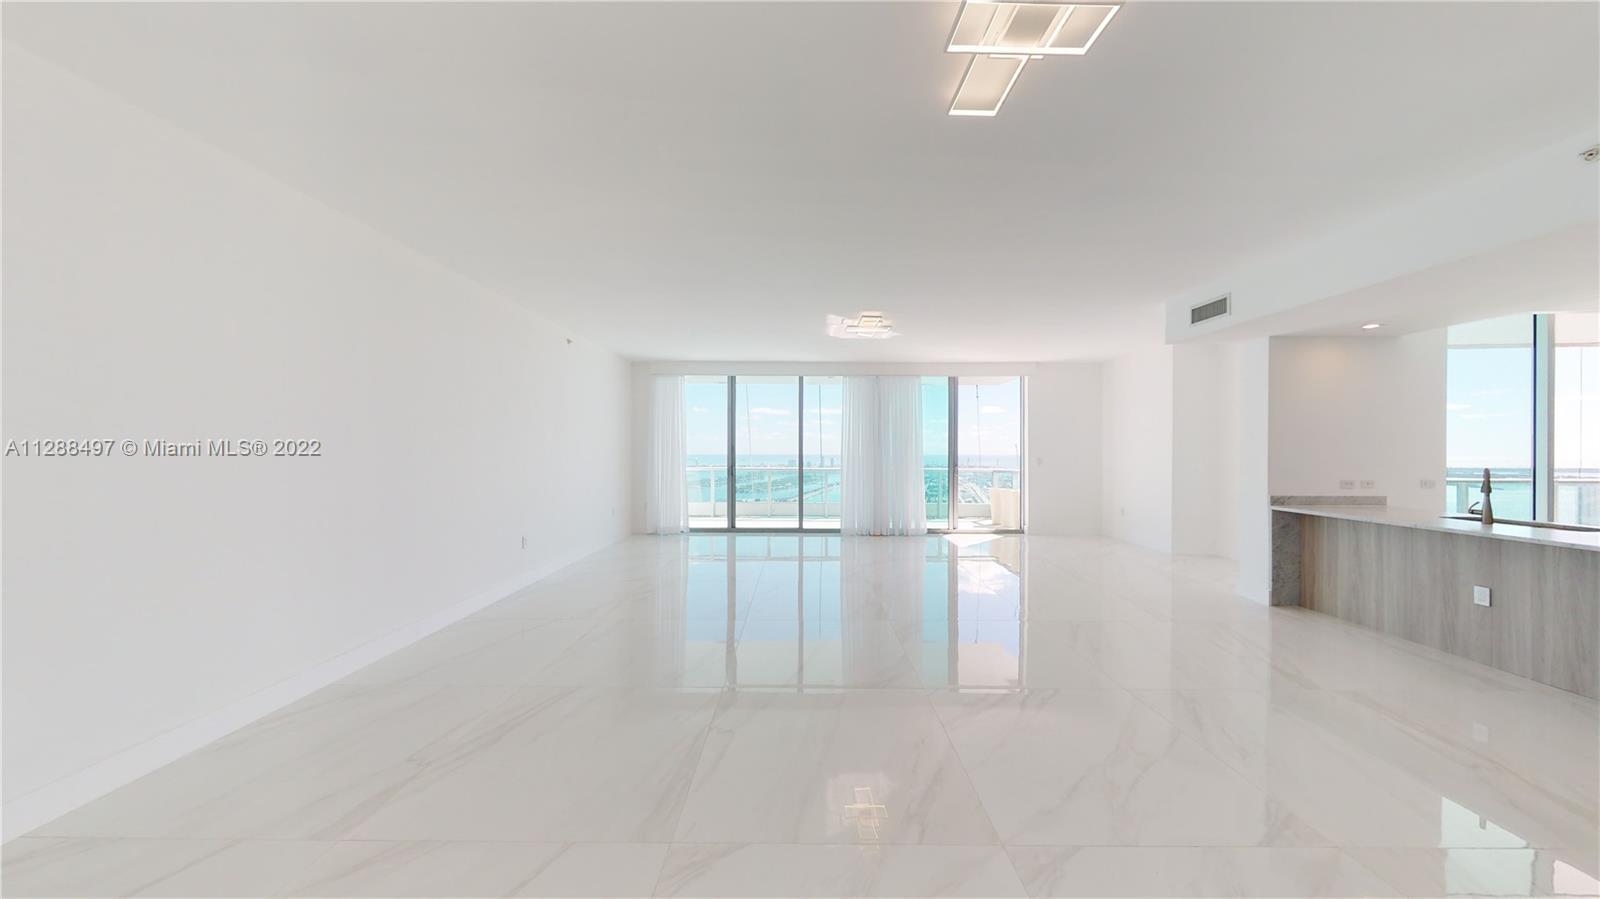 A luxury Condo, Stunning views with Spectacular three bedrooms, 3 ½ bathrooms, a long terrace, custo